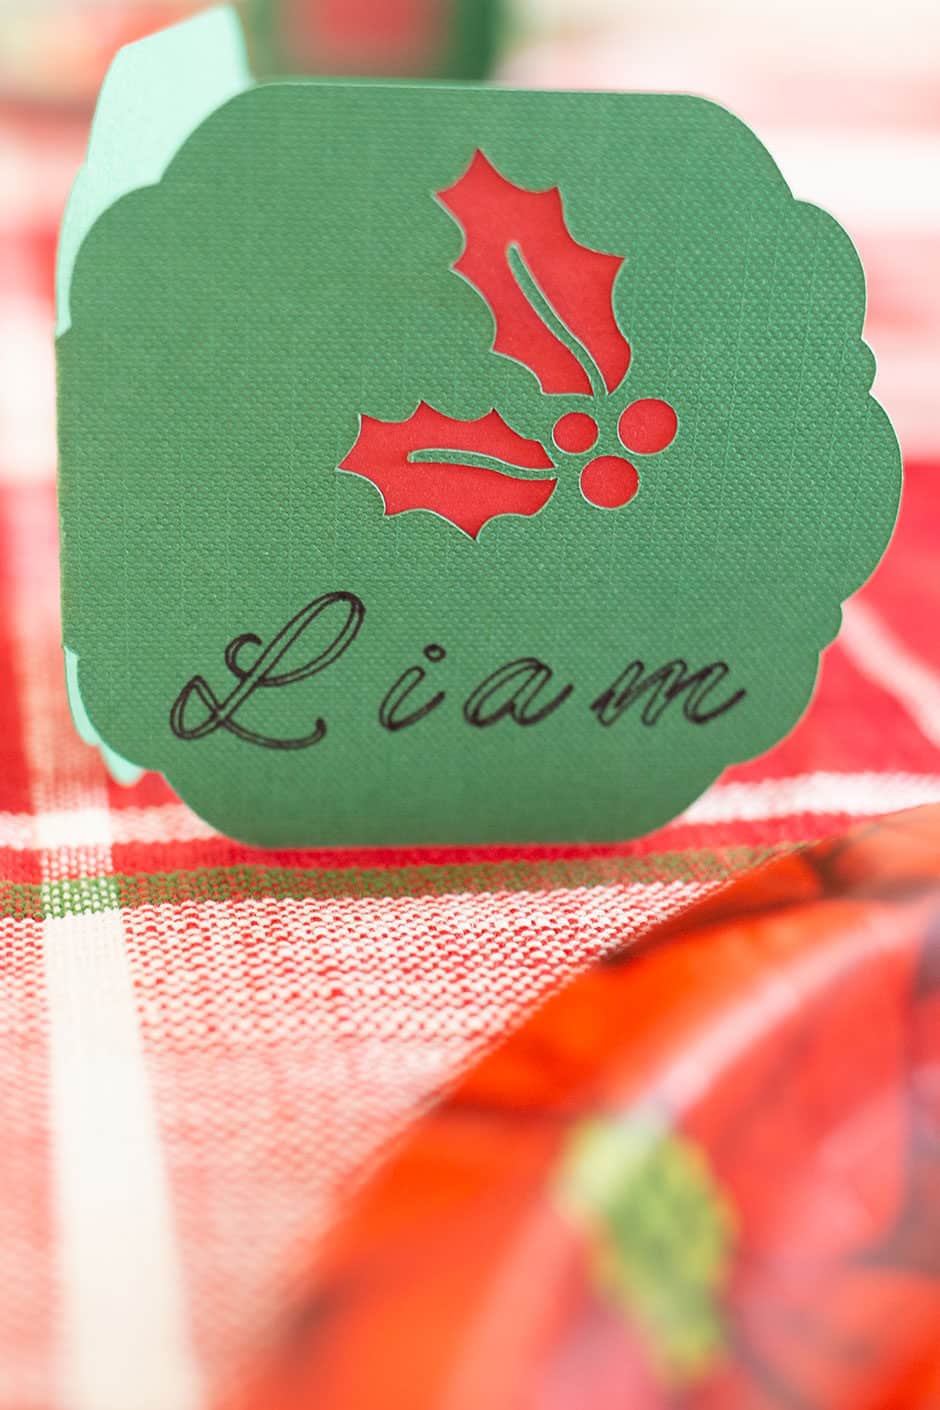 Looking for an affordable, kid-friendly Christmas tablescape? Well, pull out your Cricut Maker machine and get to crafting because these three simple DIY holiday decorations will dress up even the simplest of holiday tables.